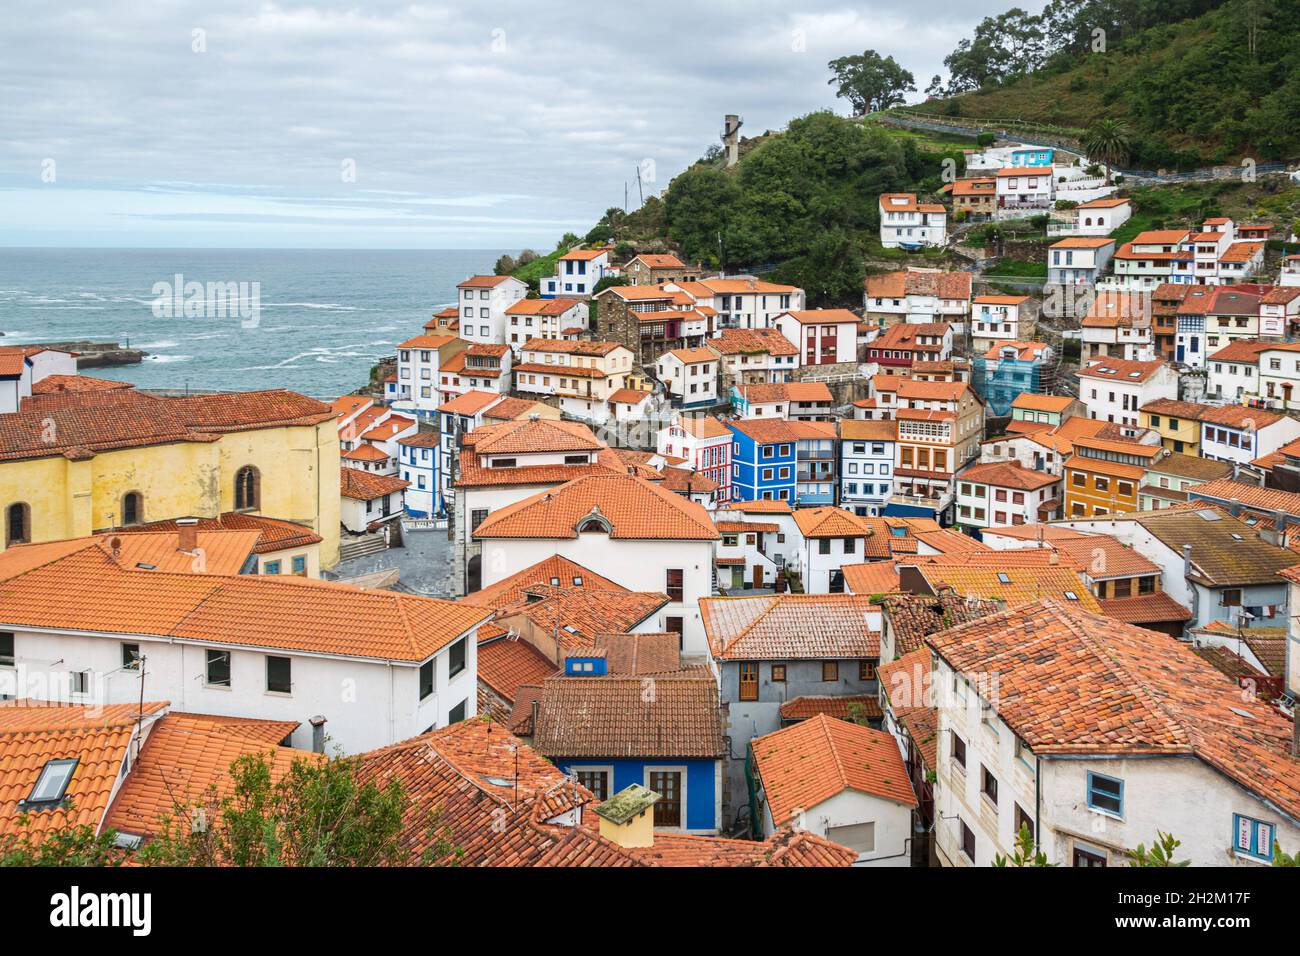 Red rooftops of a picturesque fishing village of Cudillero at the Cantabrian Sea coast in Asturias, Spain. Stock Photo